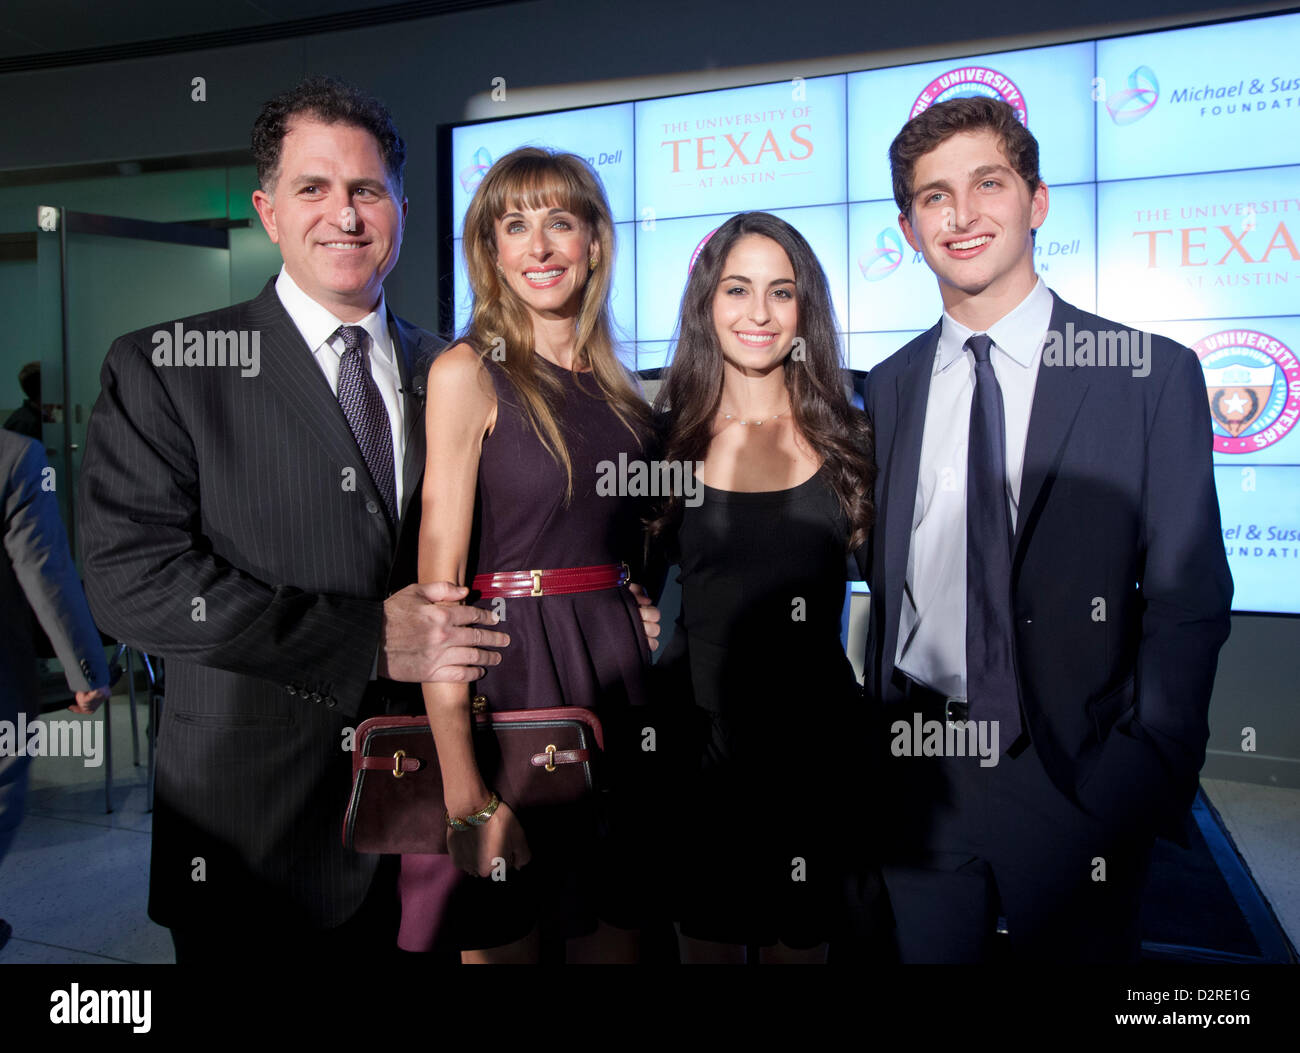 Dell Computer CEO Michael Dell and wife Susan with their teenage children Juliette and Zach in Austin, Texas Stock Photo